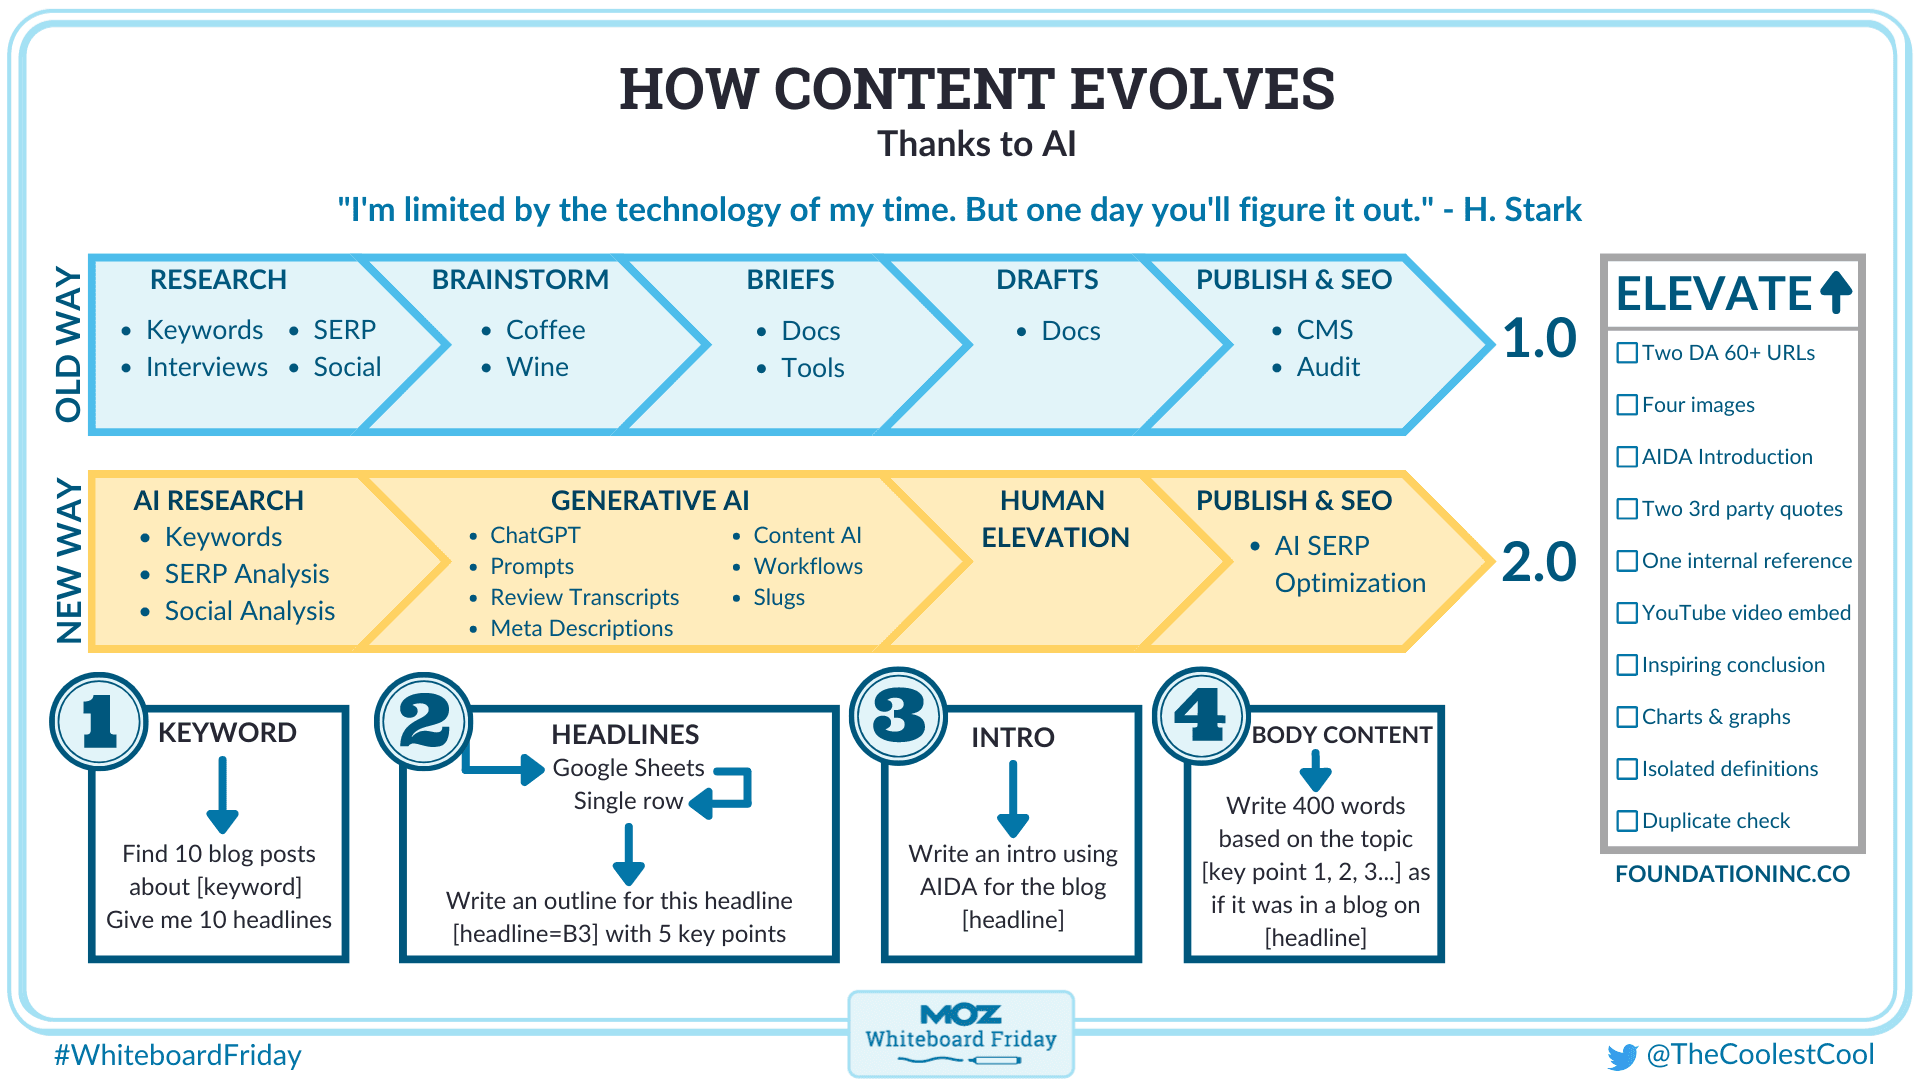 how-content-is-evolving-thanks-to-ai-whiteboard-friday